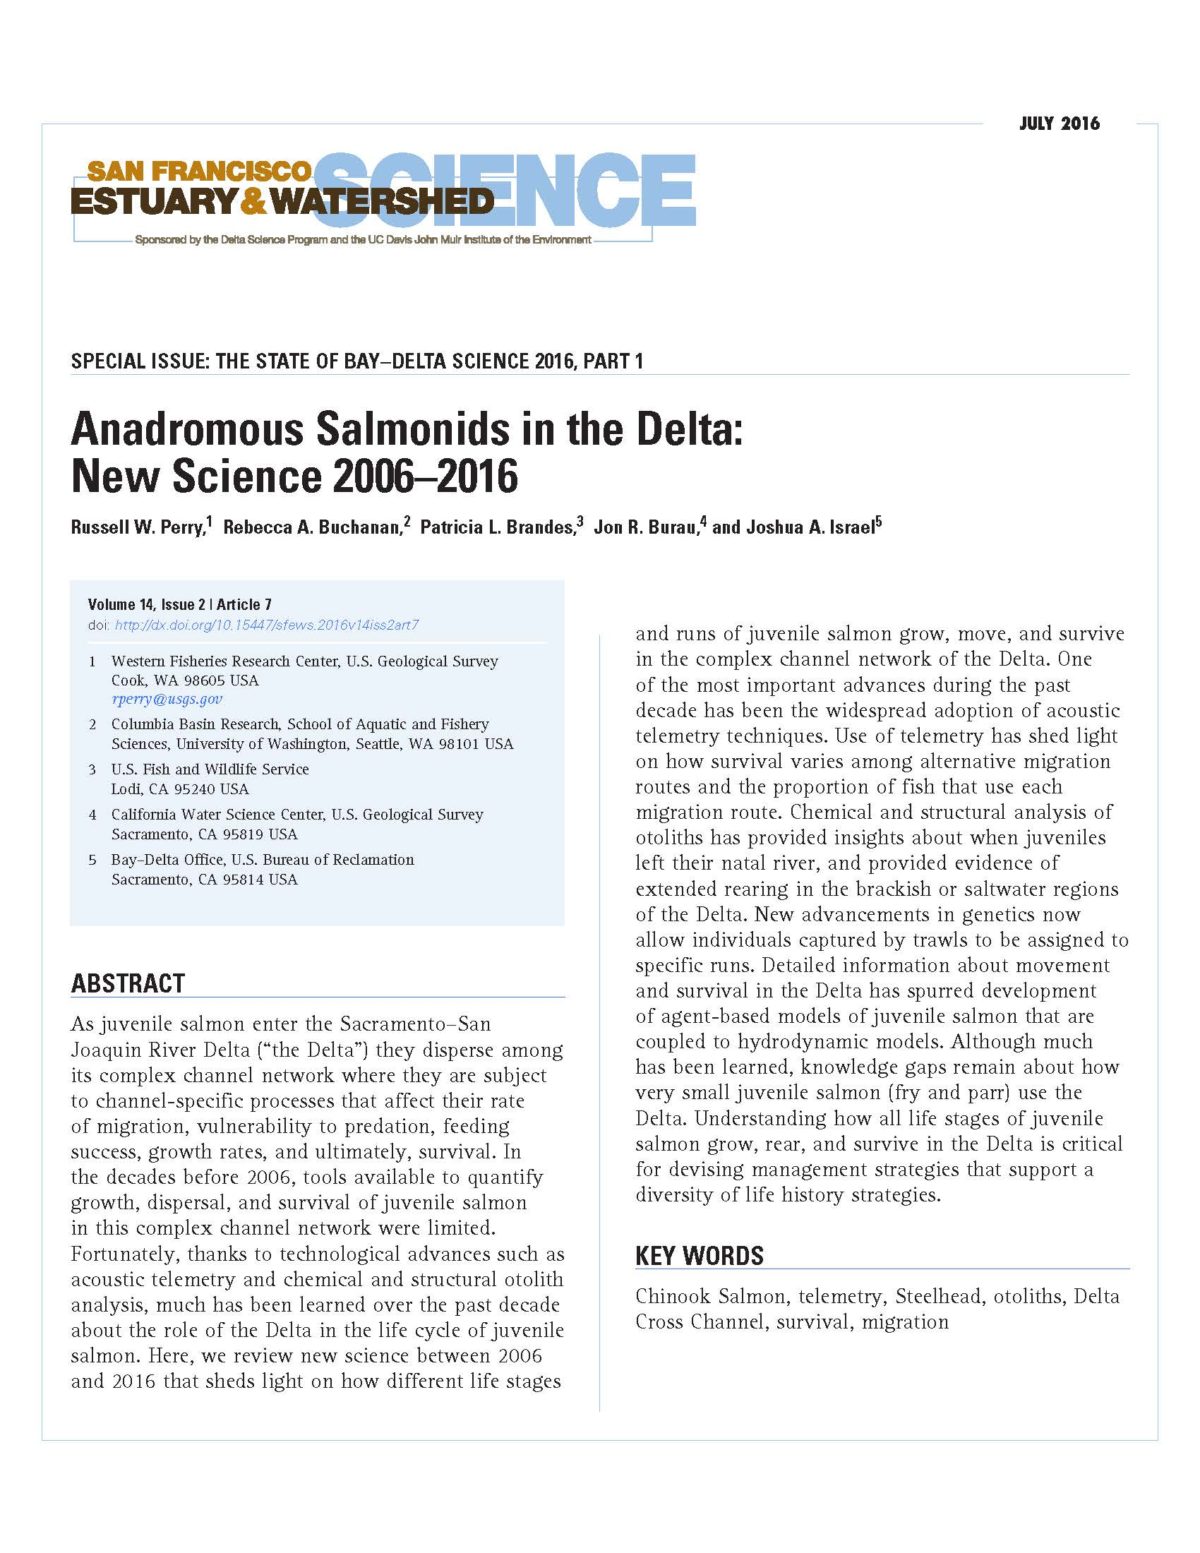 Anadromous Salmonids in the Delta: New Science 2006-2016